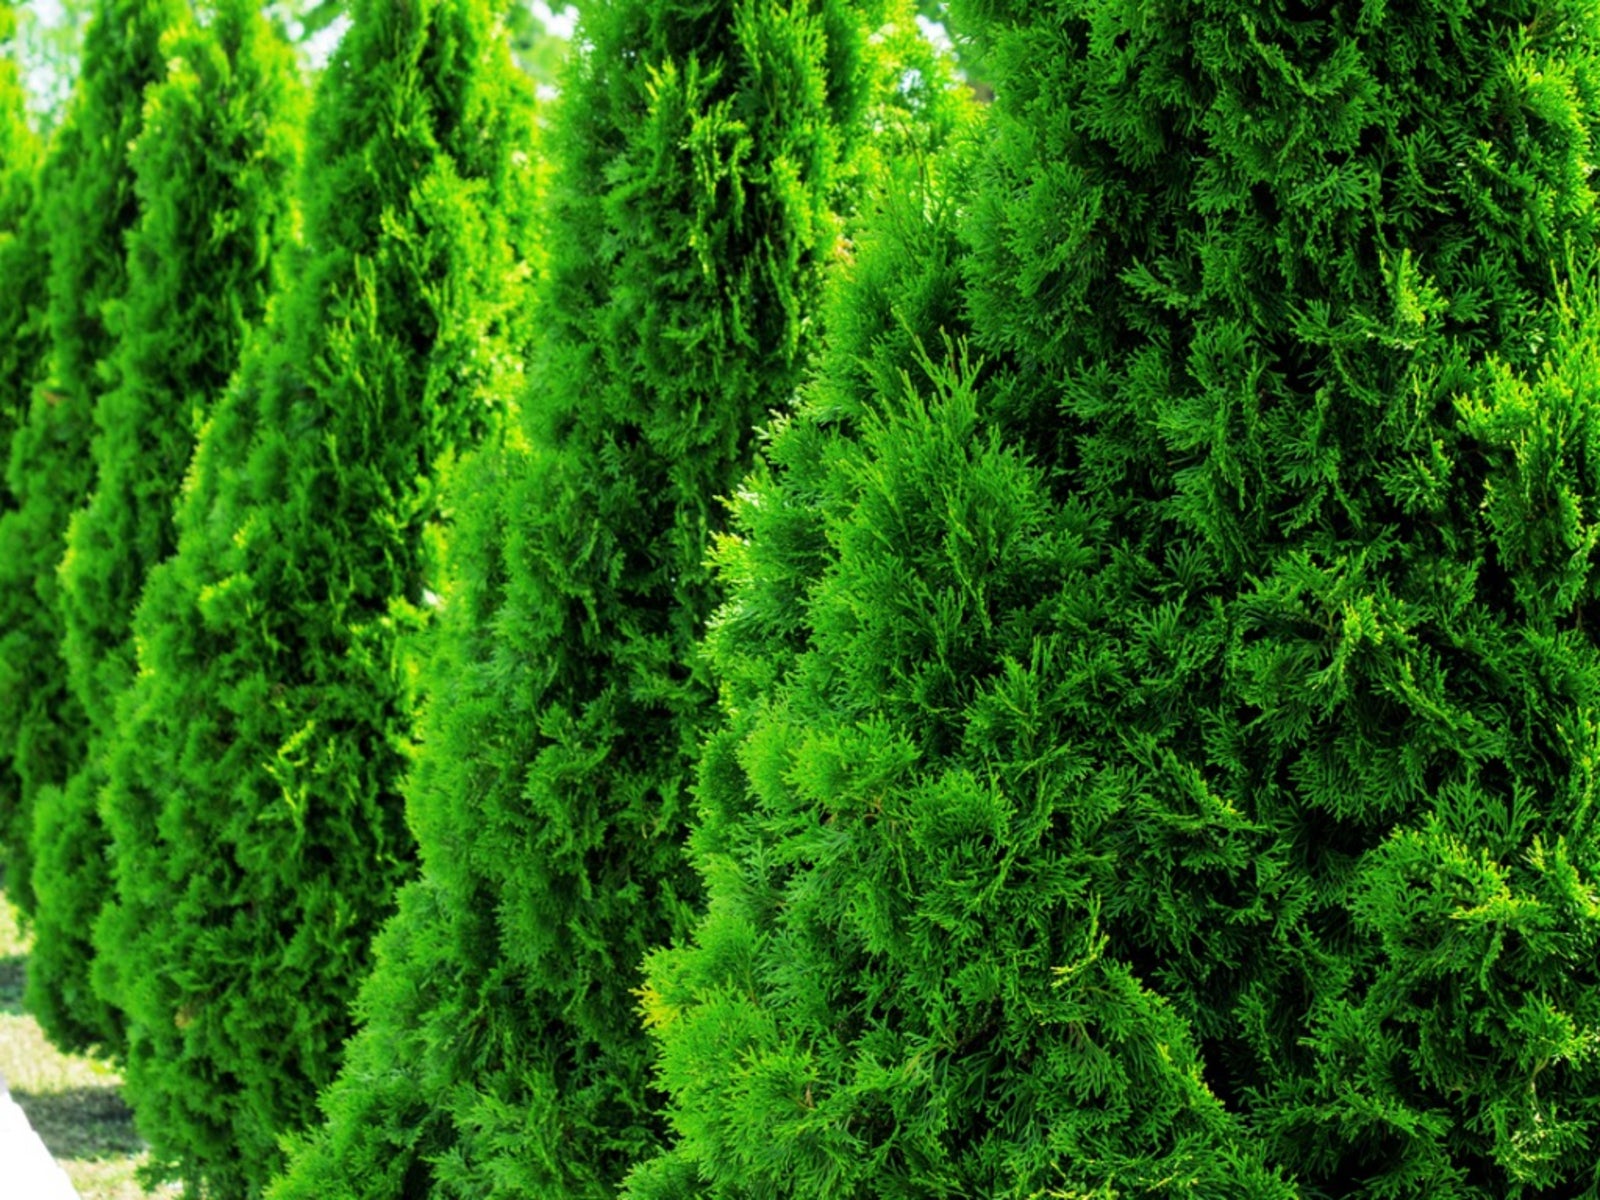 Planting An Arborvitae When To Plant Arborvitae Trees And ...